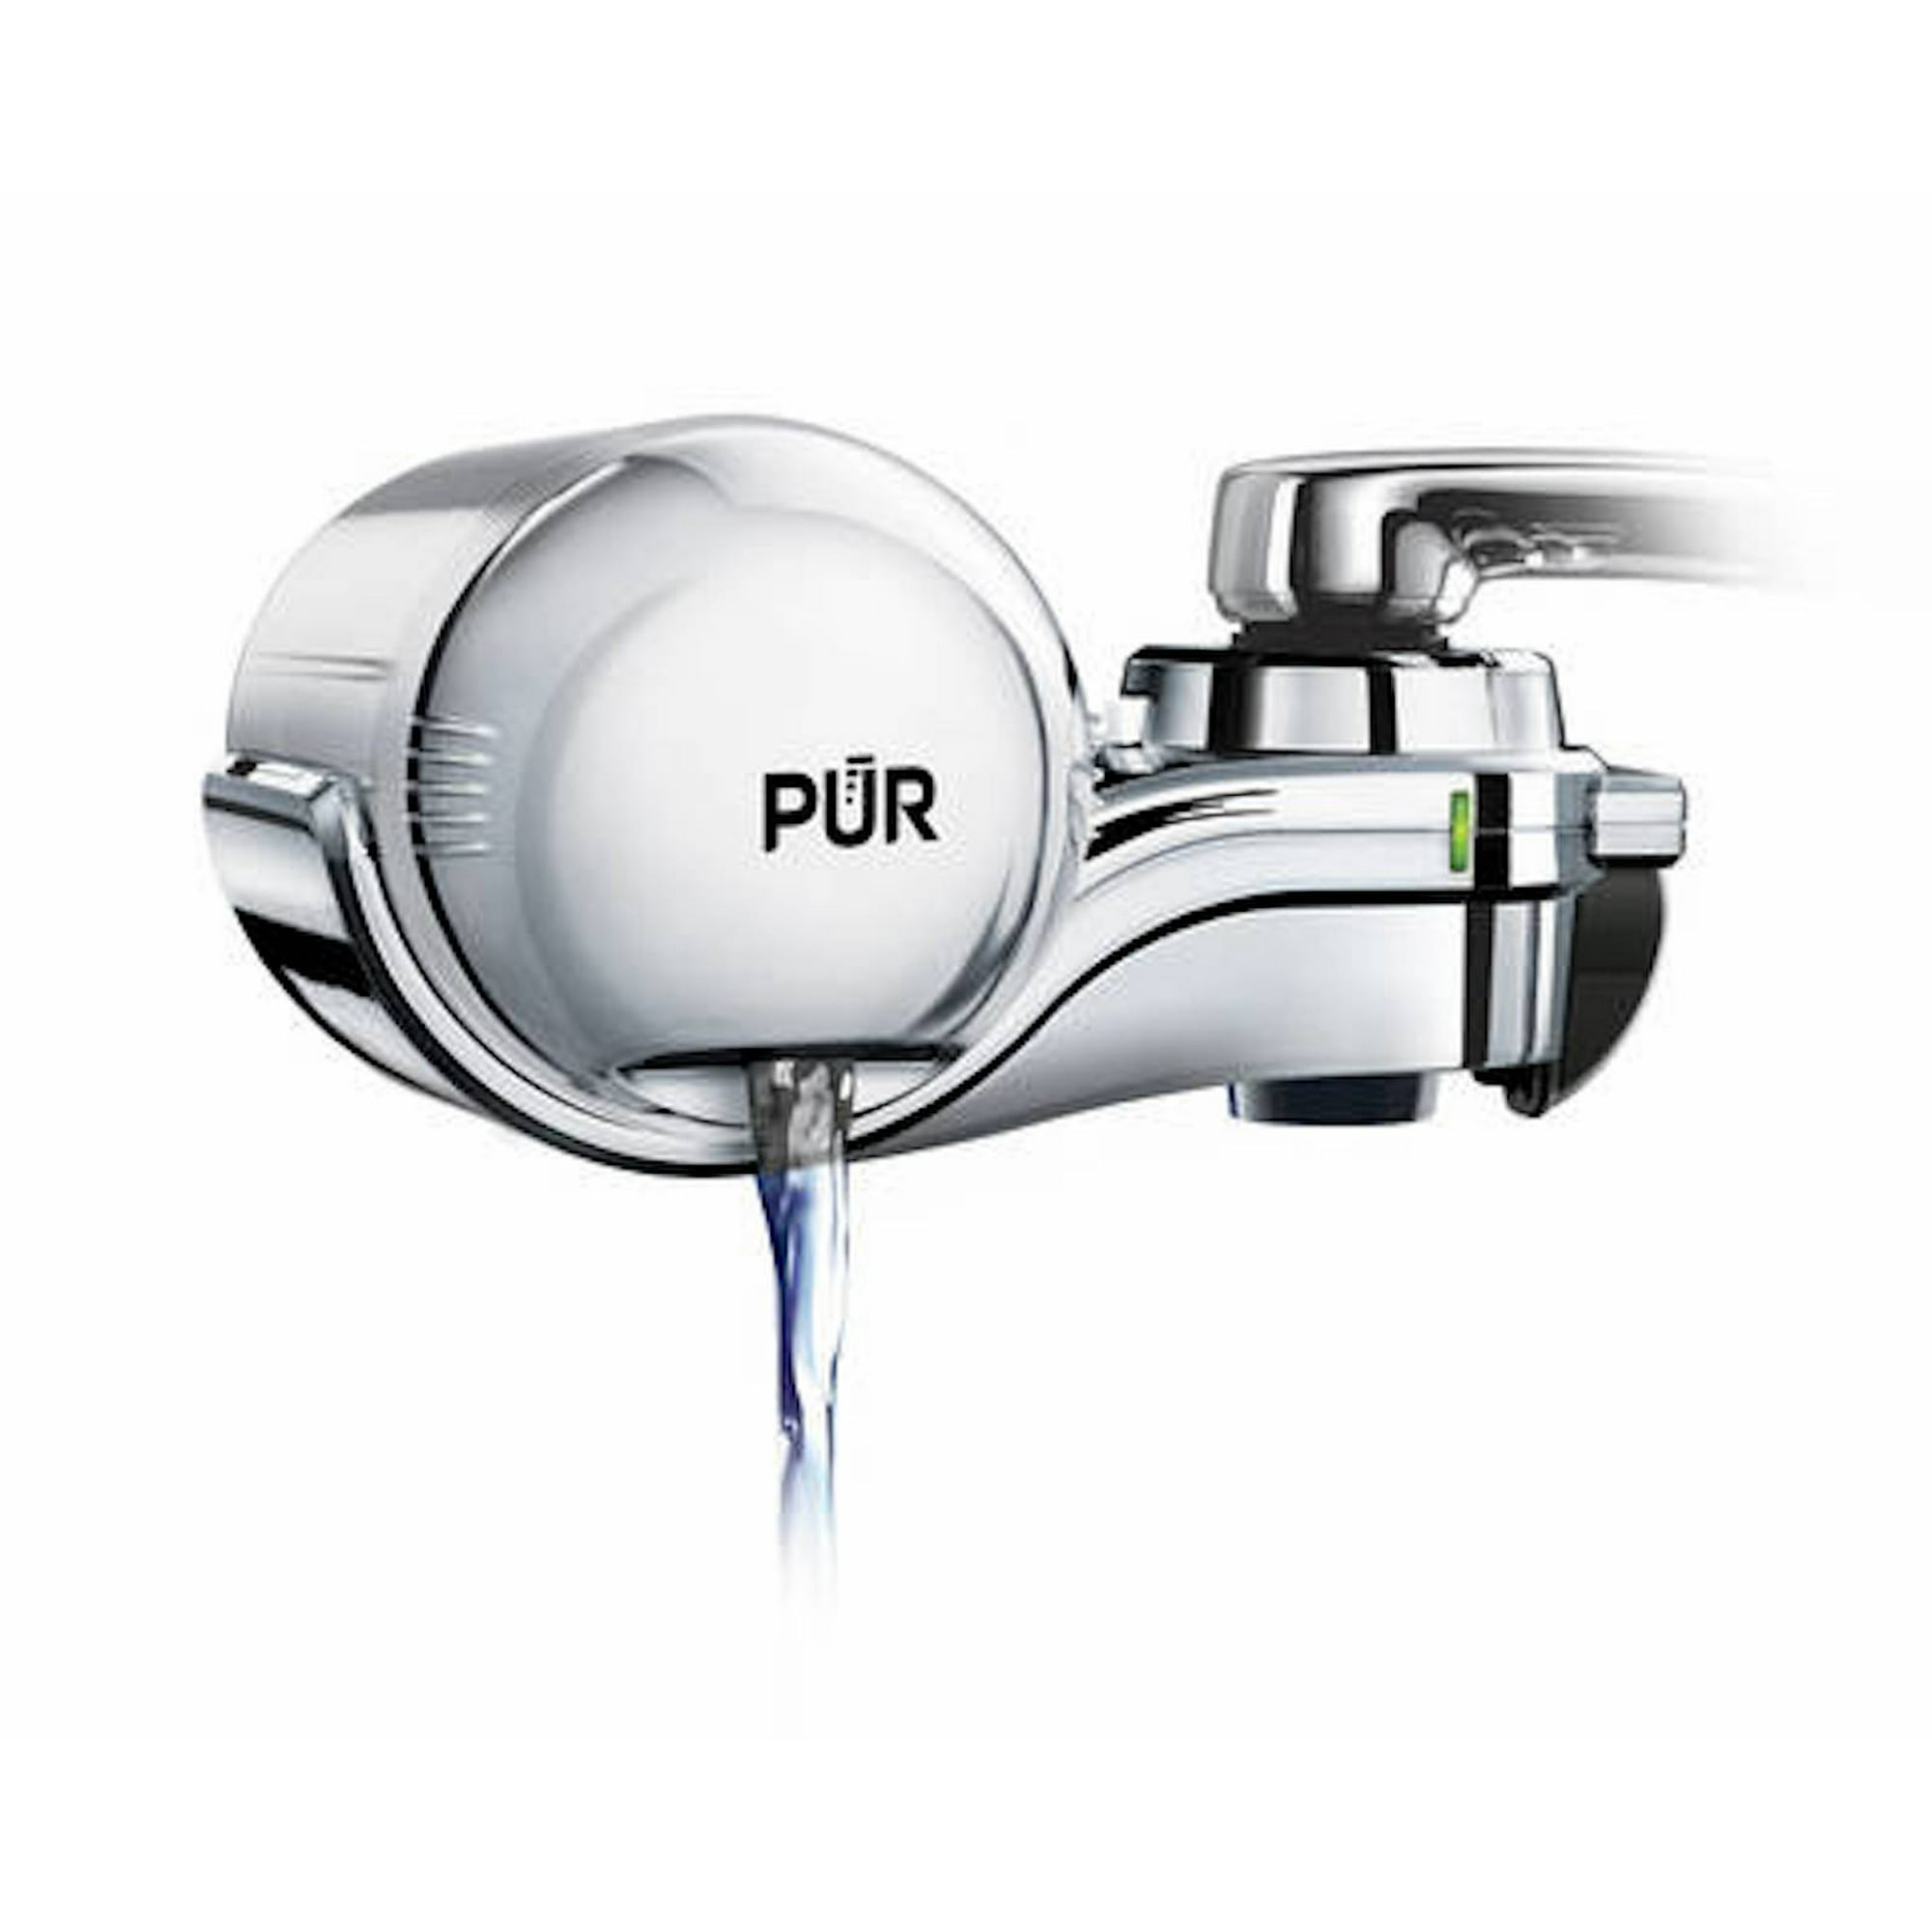 Pur Water Filtration System Faucet Advanced Walmart Canada